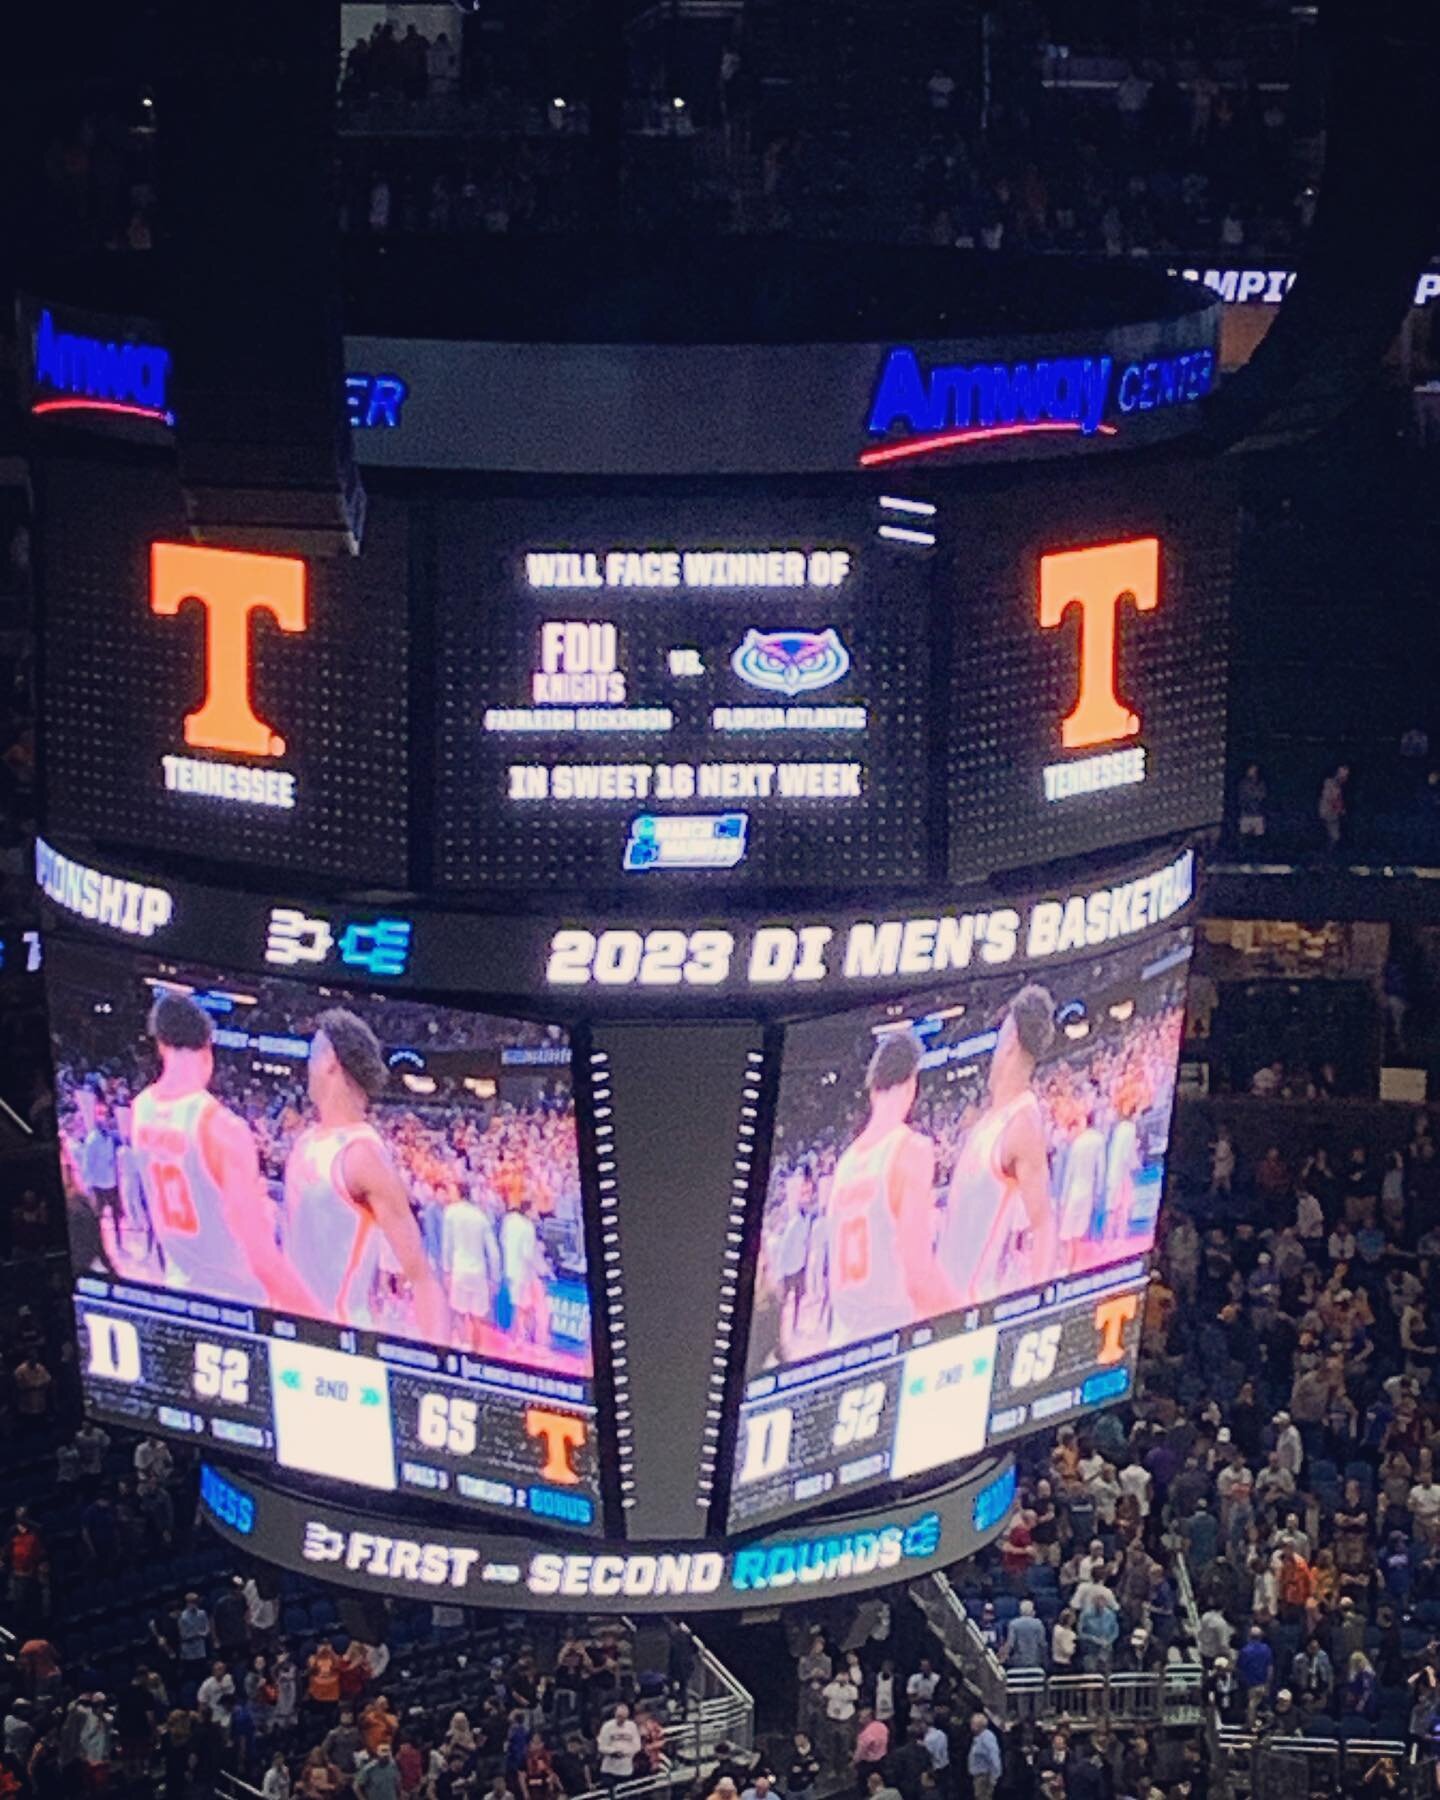 And it&rsquo;s over!!! #Tennessee with the Win!!! #MarchMadness 2nd round #Orlando